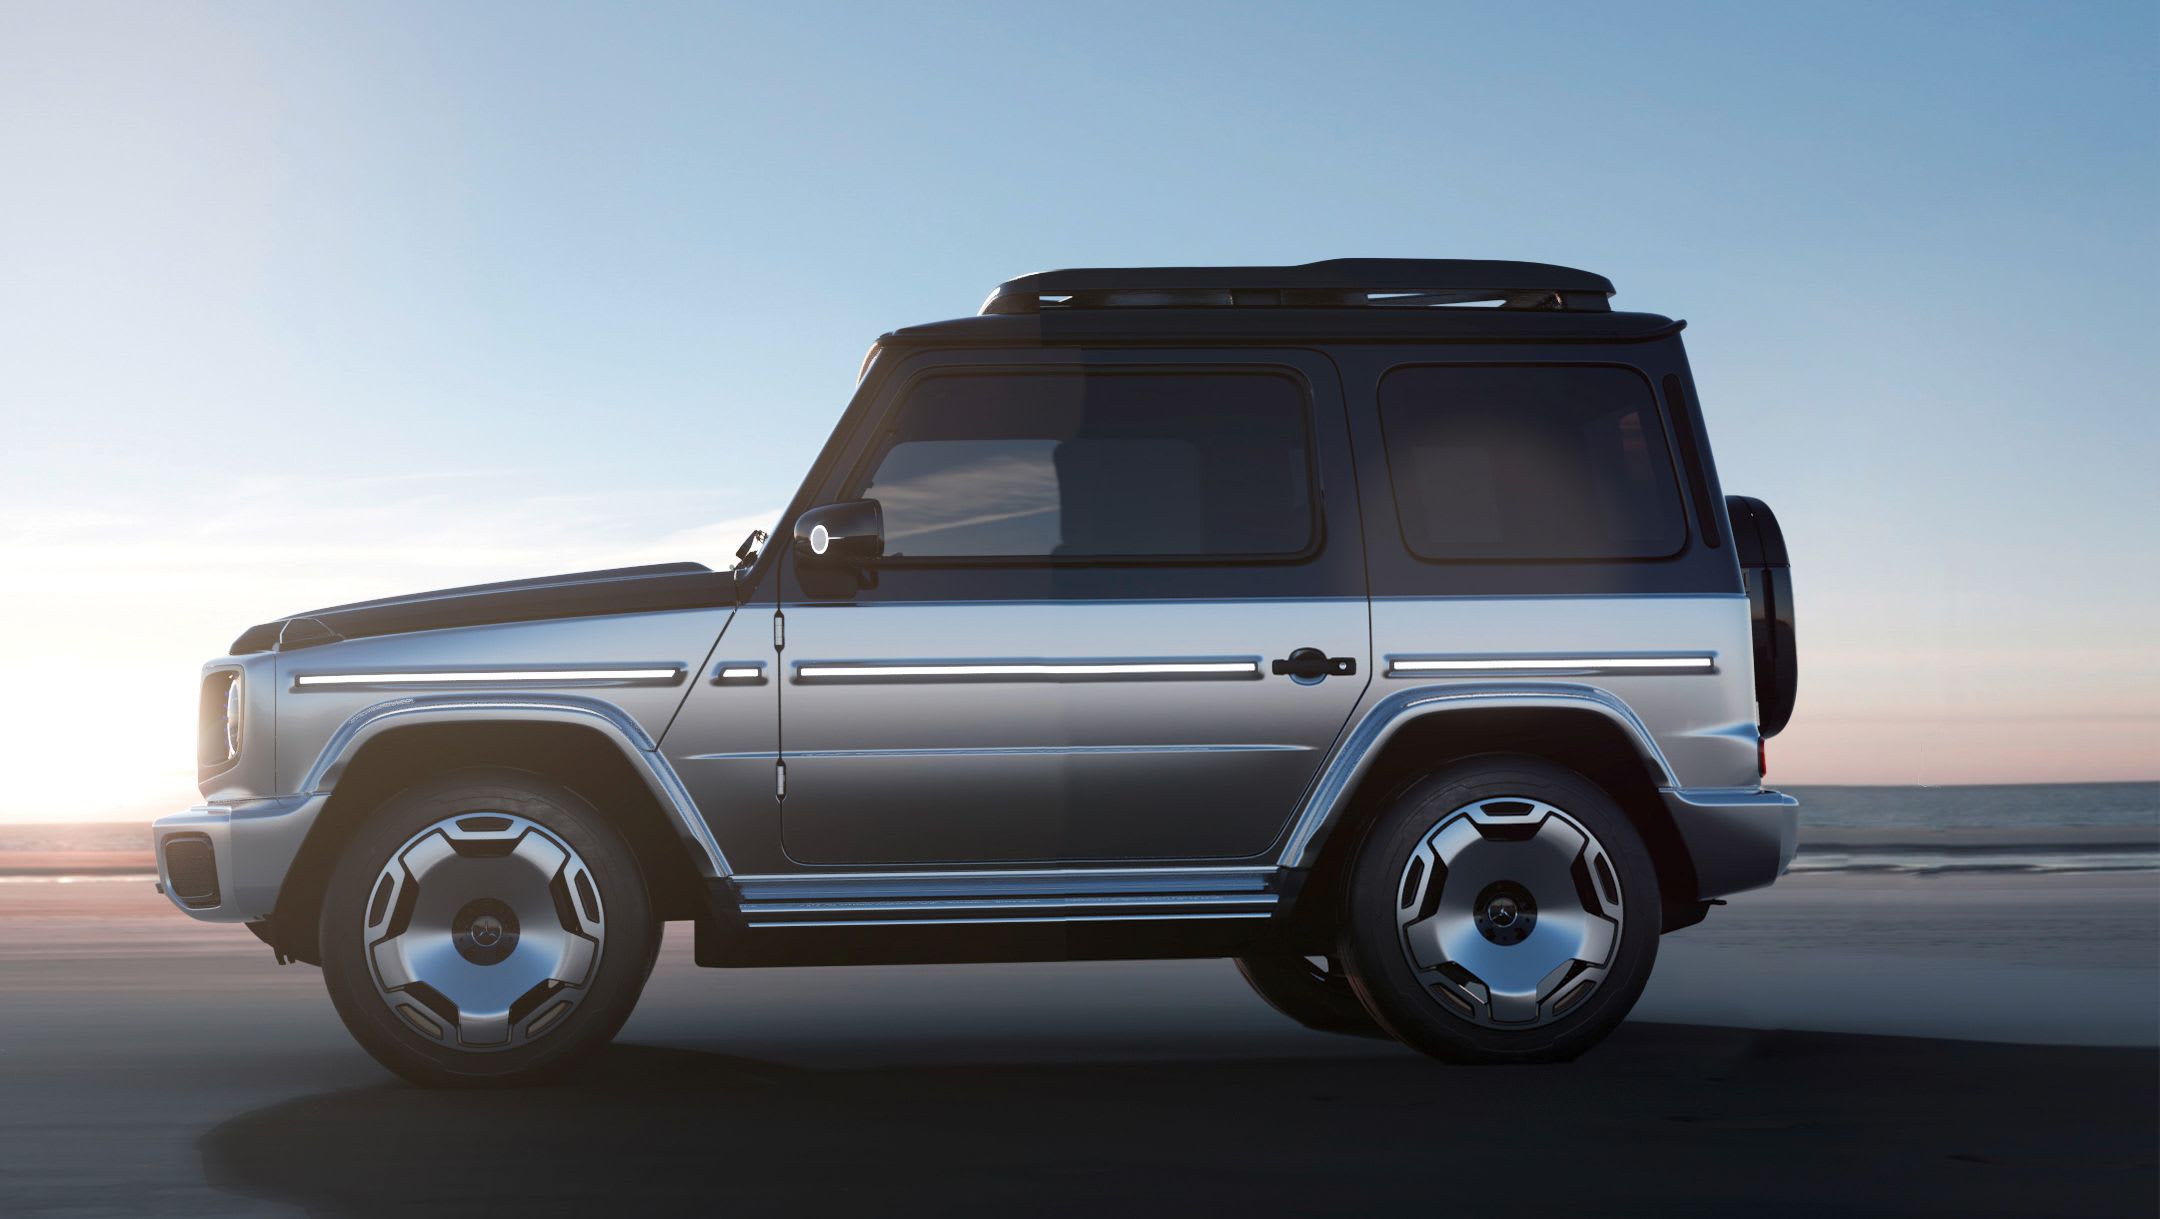 Mercedes next to come after a share of the Defender and Wrangler space with  a miniature G-Wagen - Car News